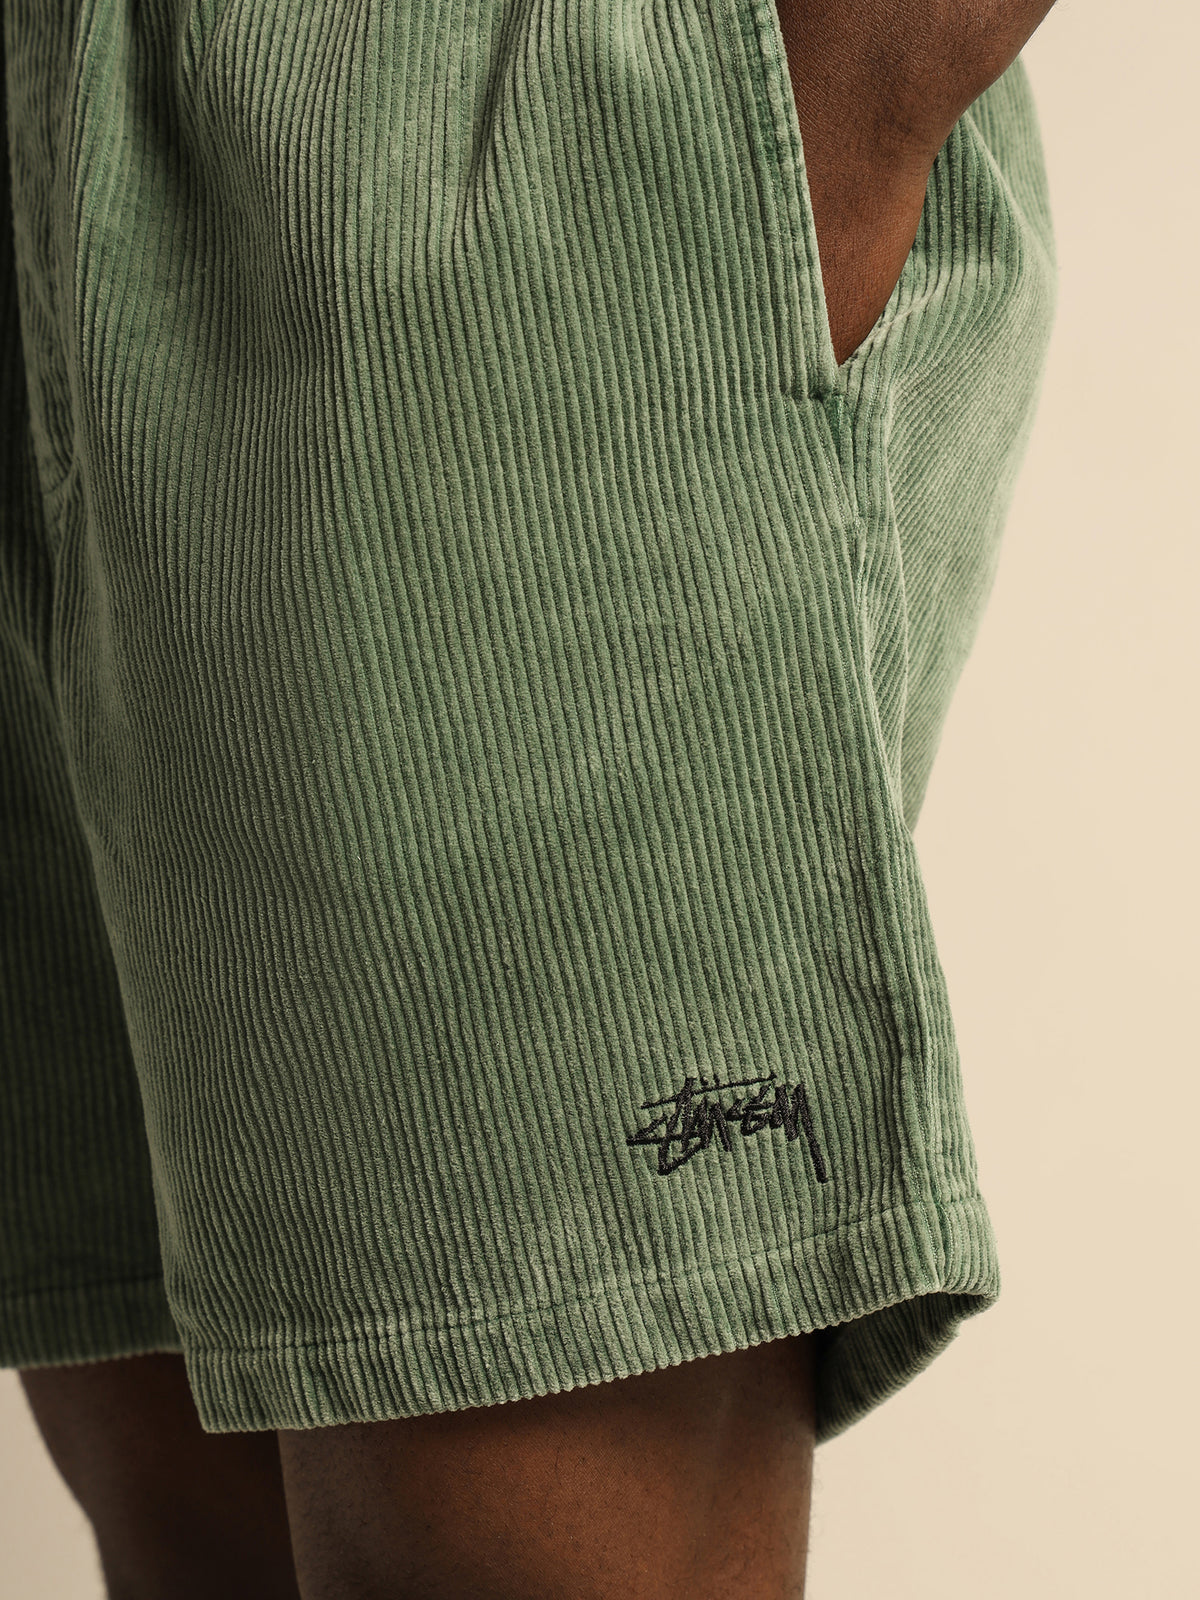 Wide Wale Cord Shorts in Forest Green